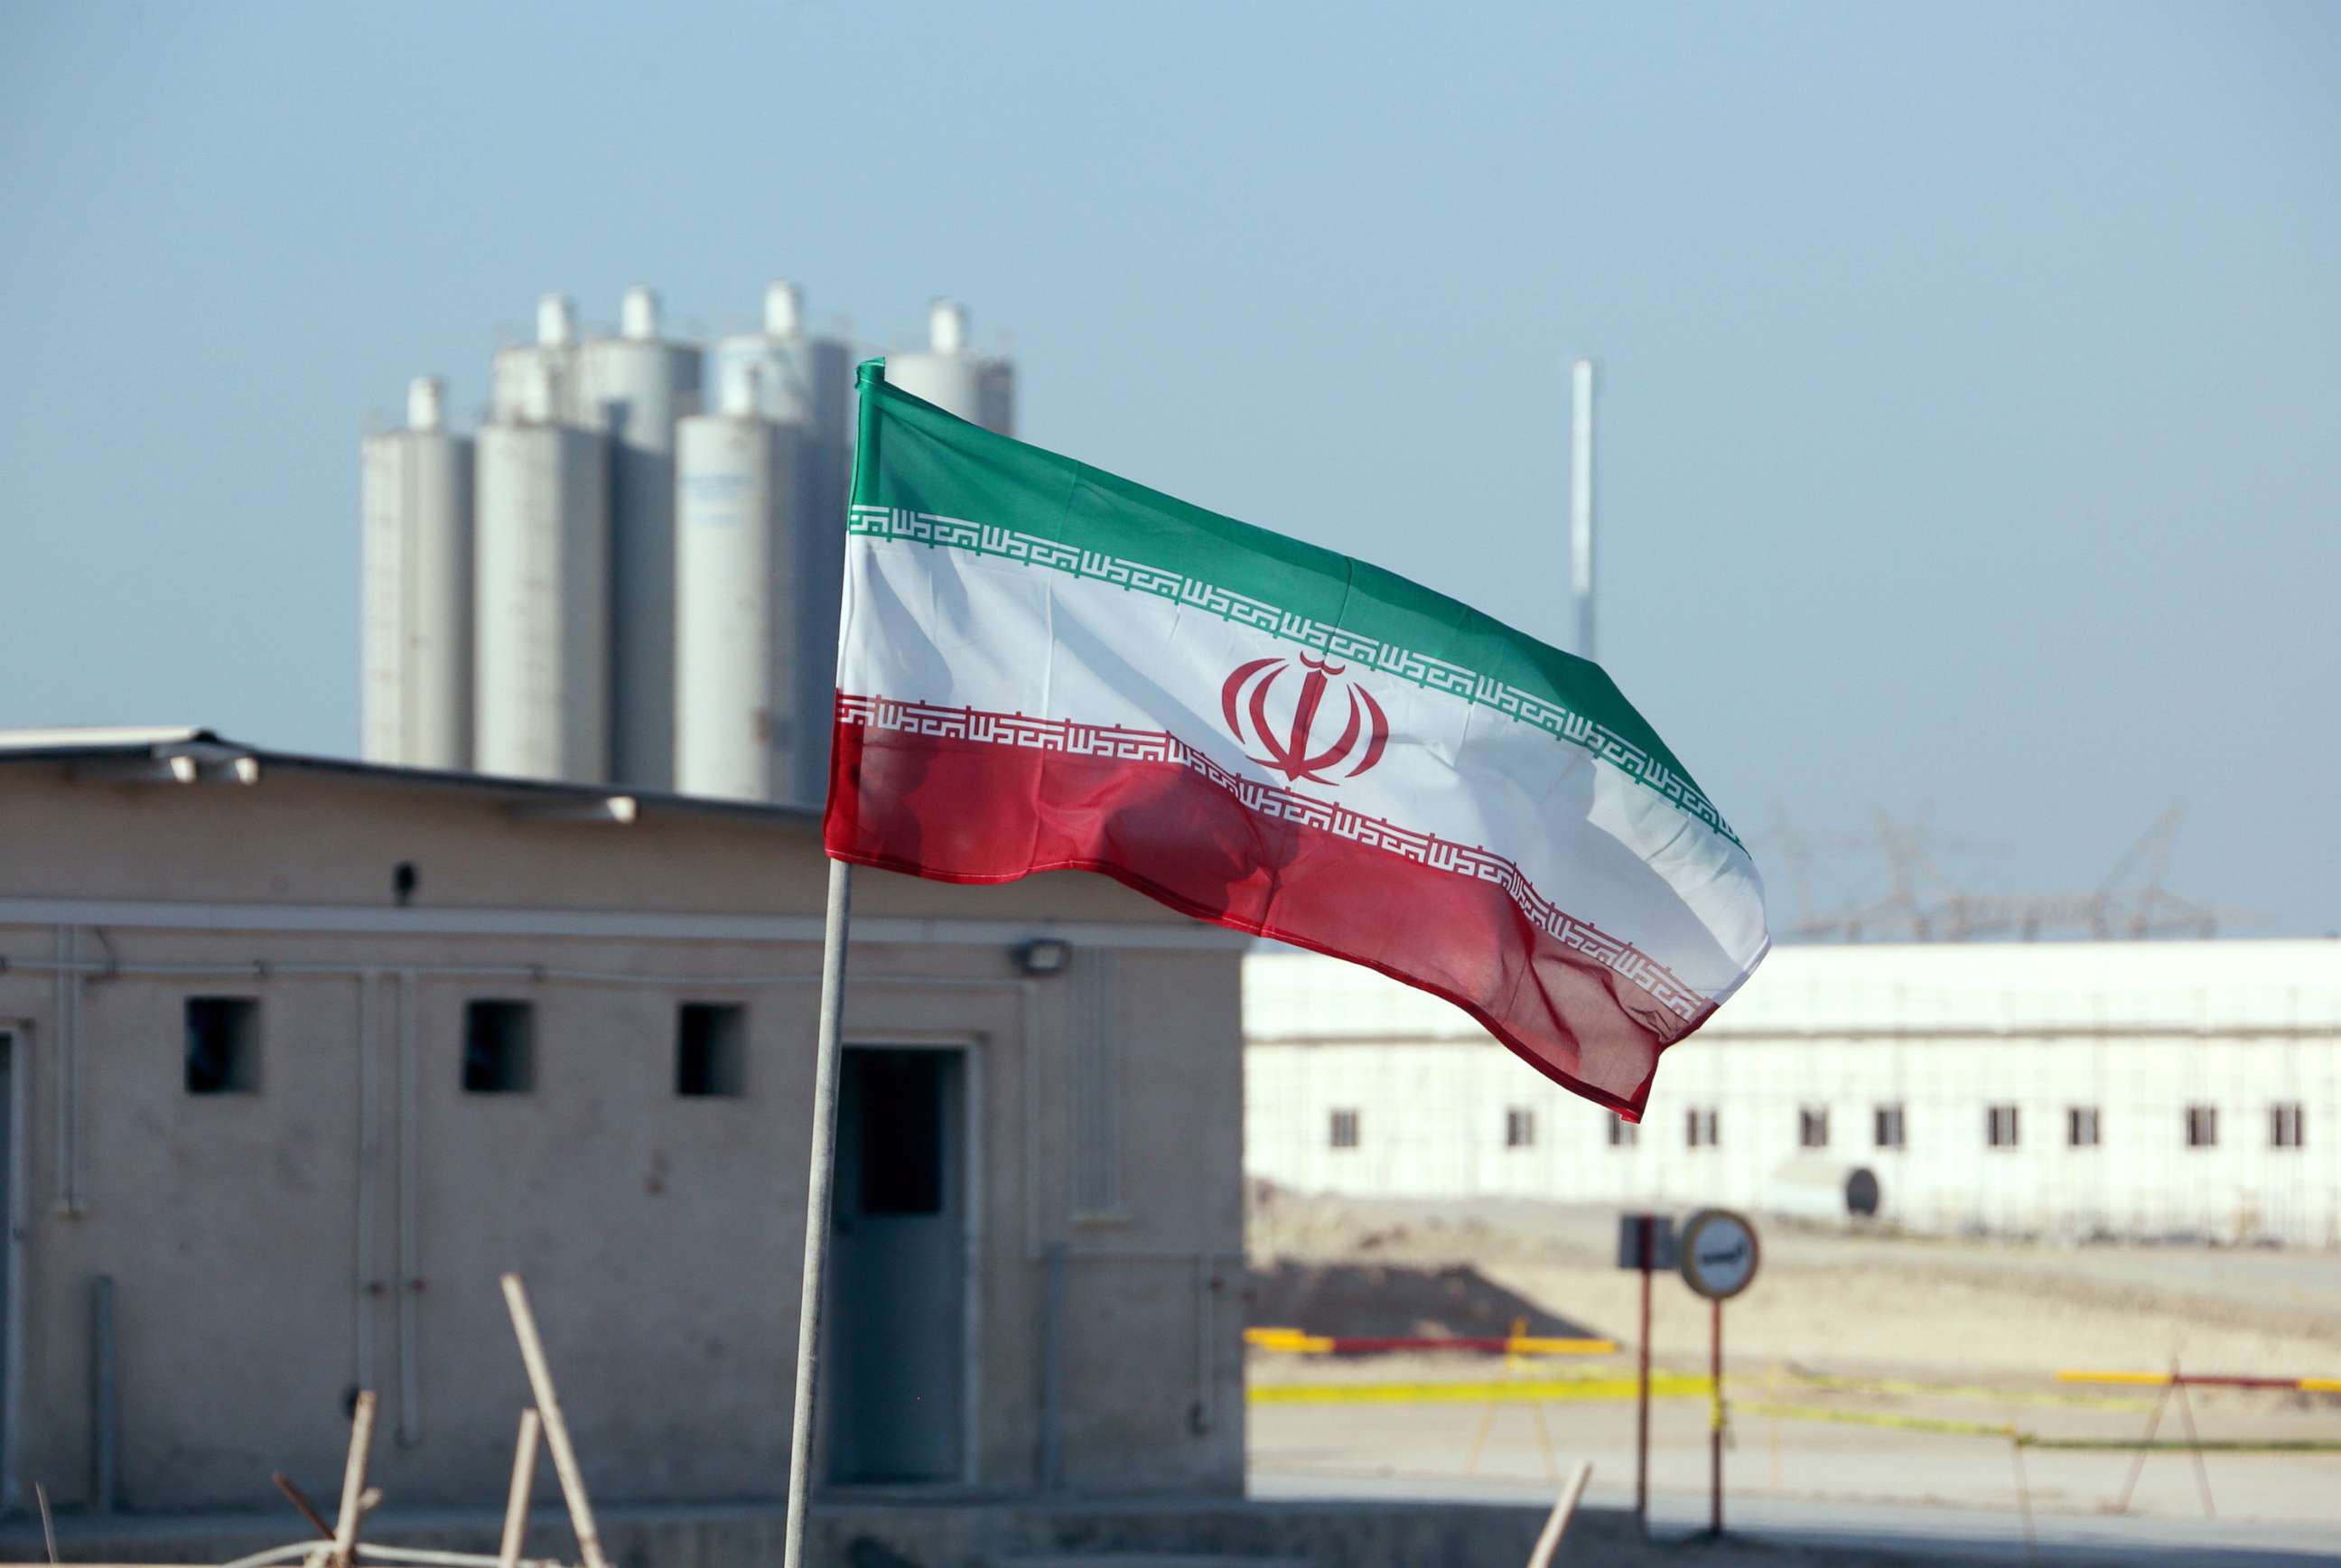 PHOTO: An Iranian flag flies over Iran's Bushehr nuclear power plant, Nov. 10, 2019, during an official ceremony to kick-start works on a second reactor at the facility.